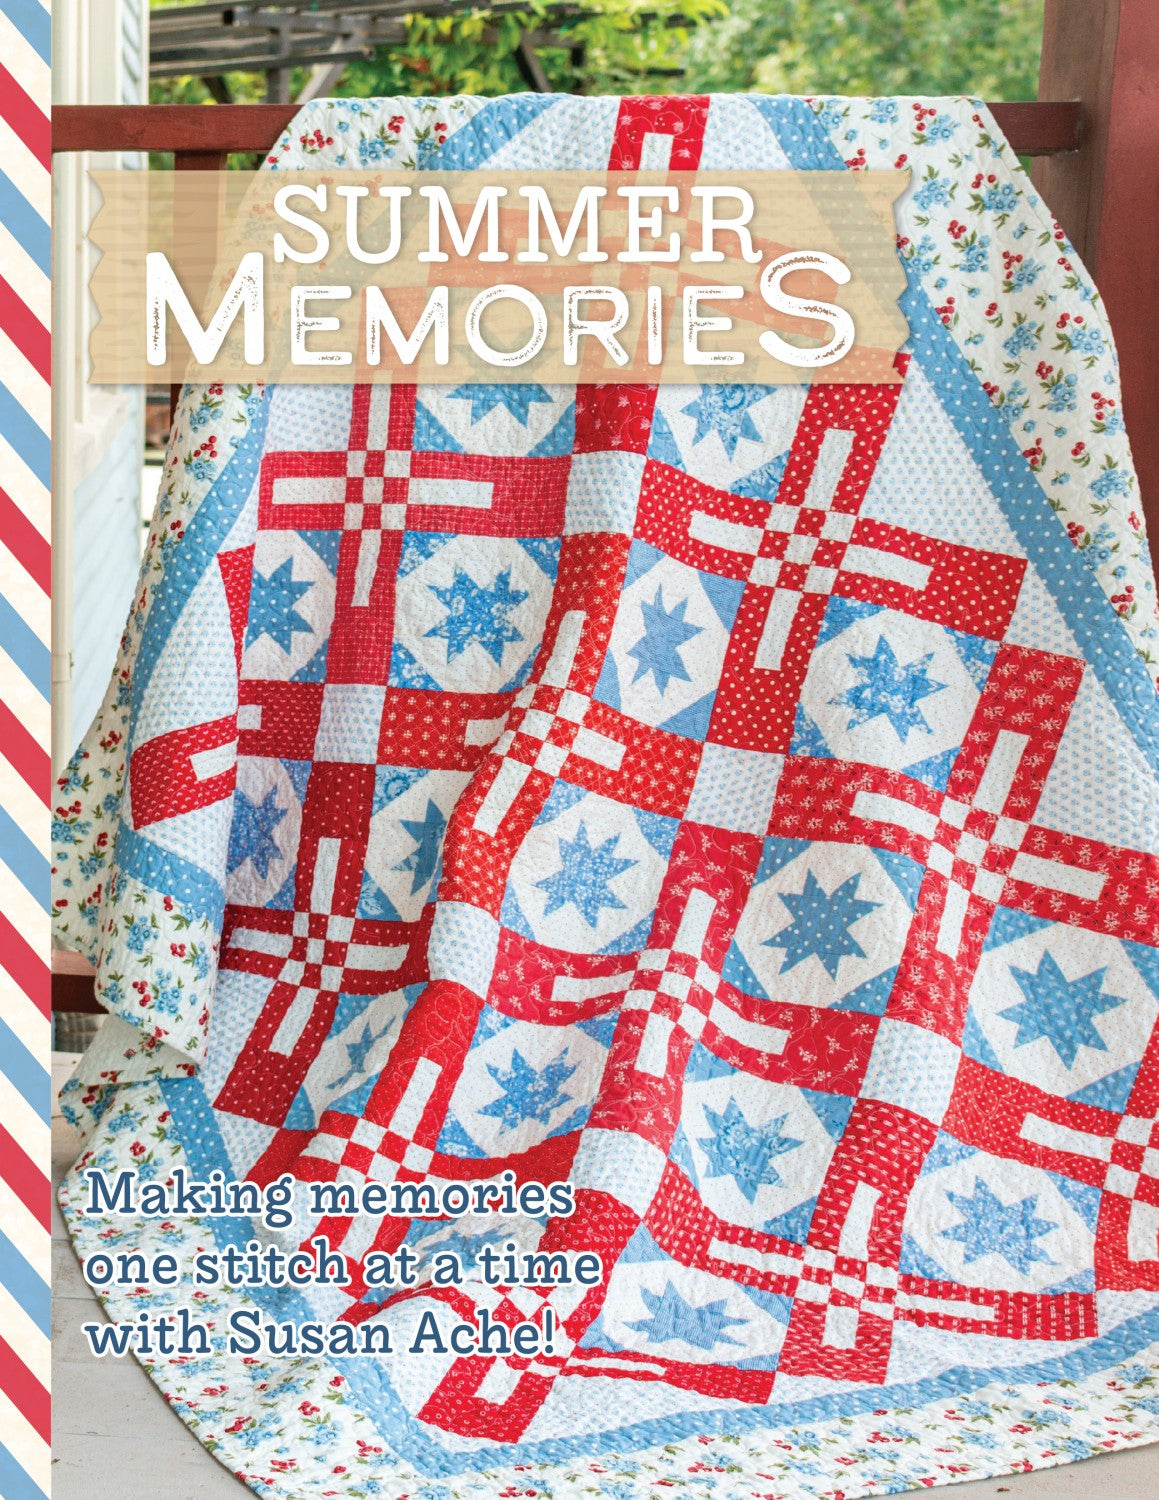 Summer Memories Quilt Pattern Book by Susan Ache for It's Sew Emma